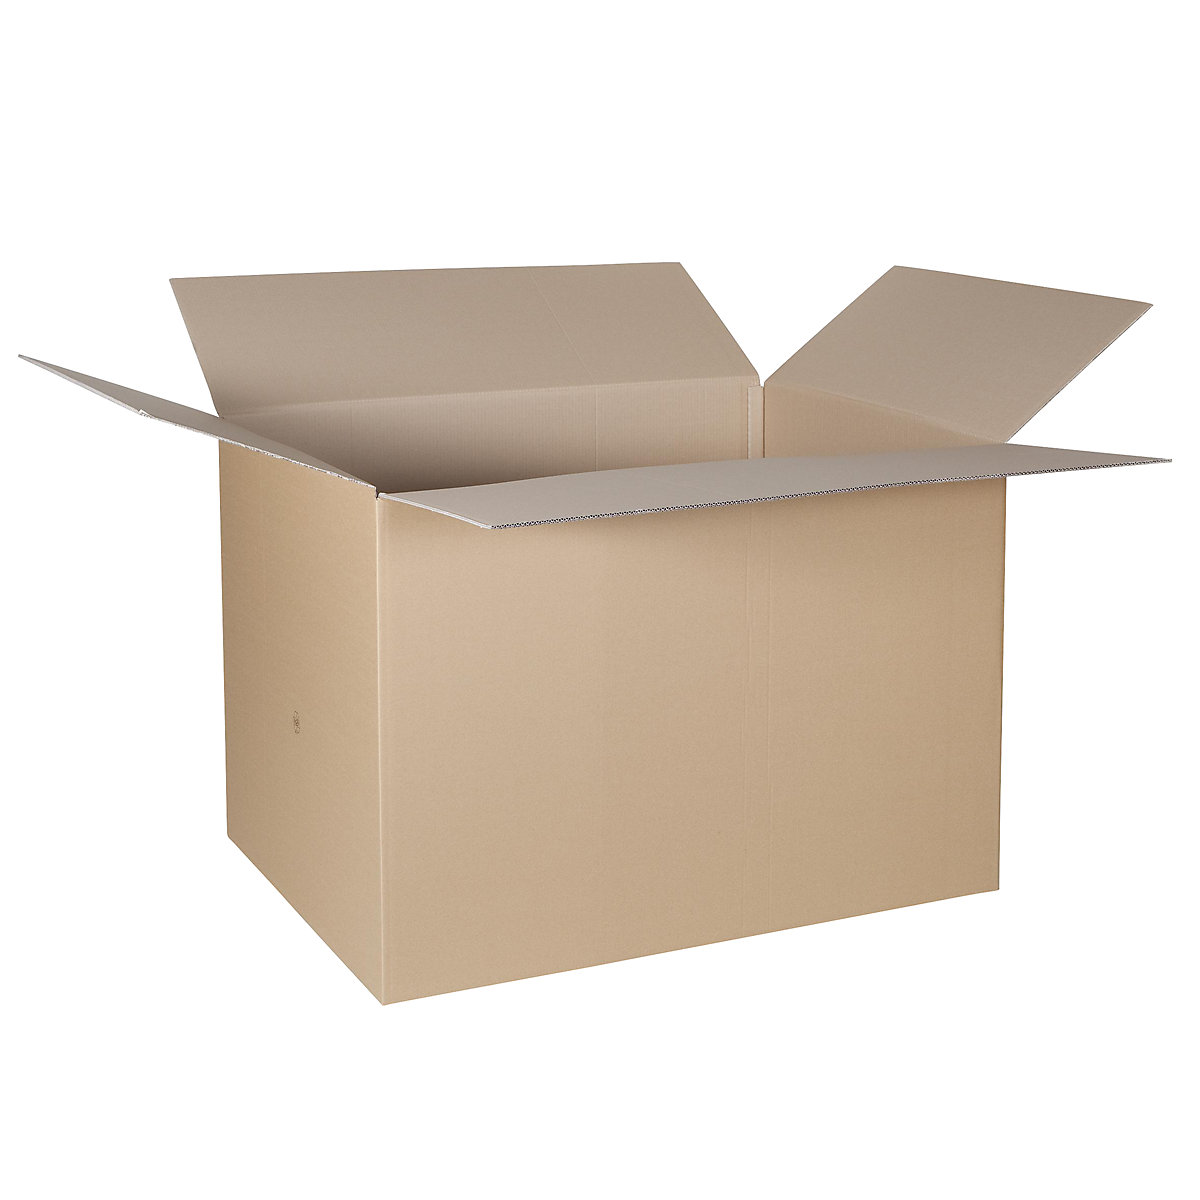 Folding cardboard box, FEFCO 0201, made of double fluted cardboard, internal dimensions 1180 x 780 x 800 mm, pack of 50-5